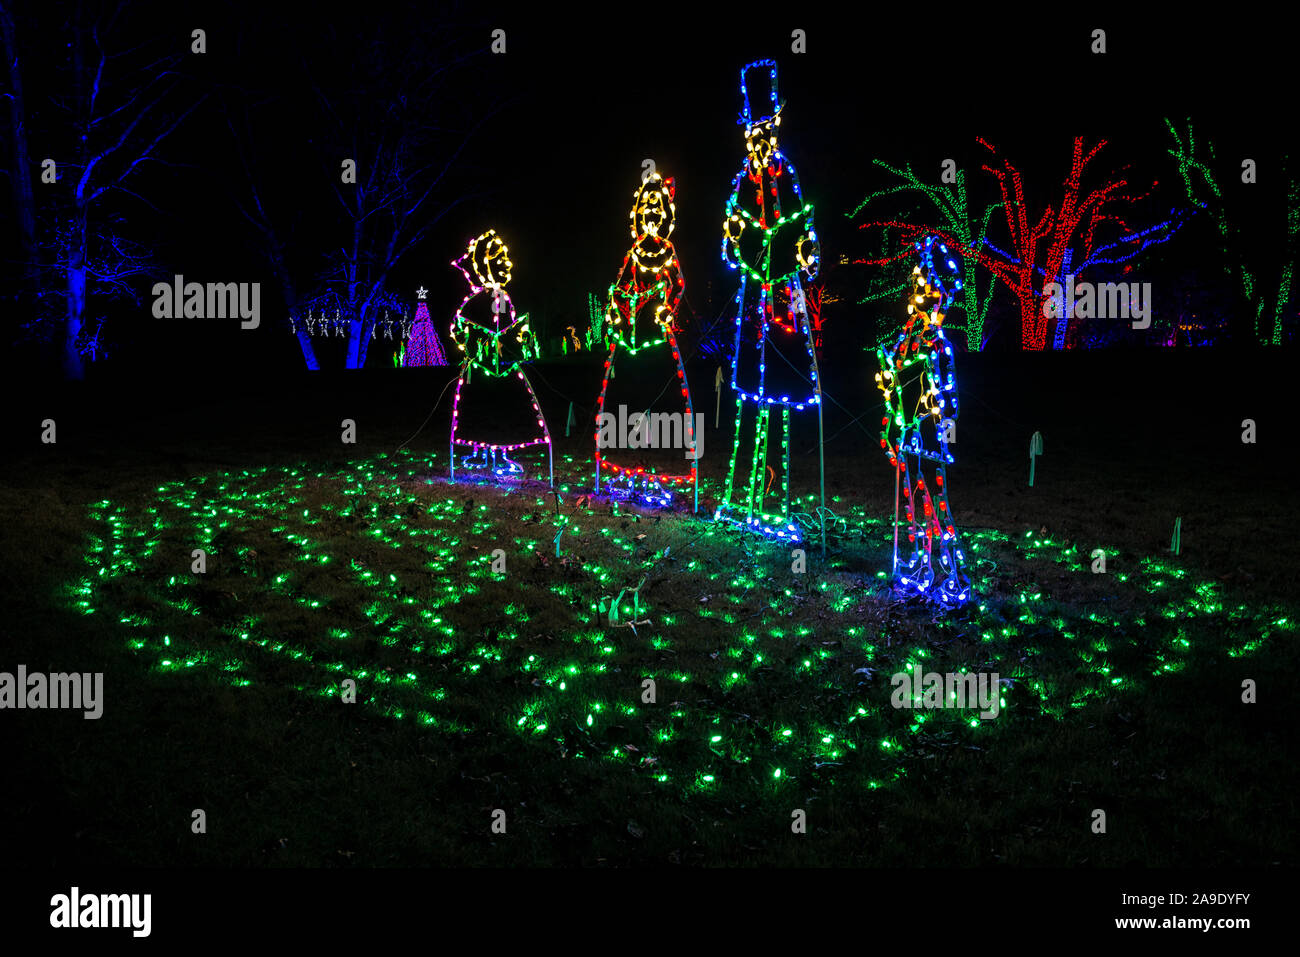 Xmas Carolers In Colorful Lights Night Green Grass Lights